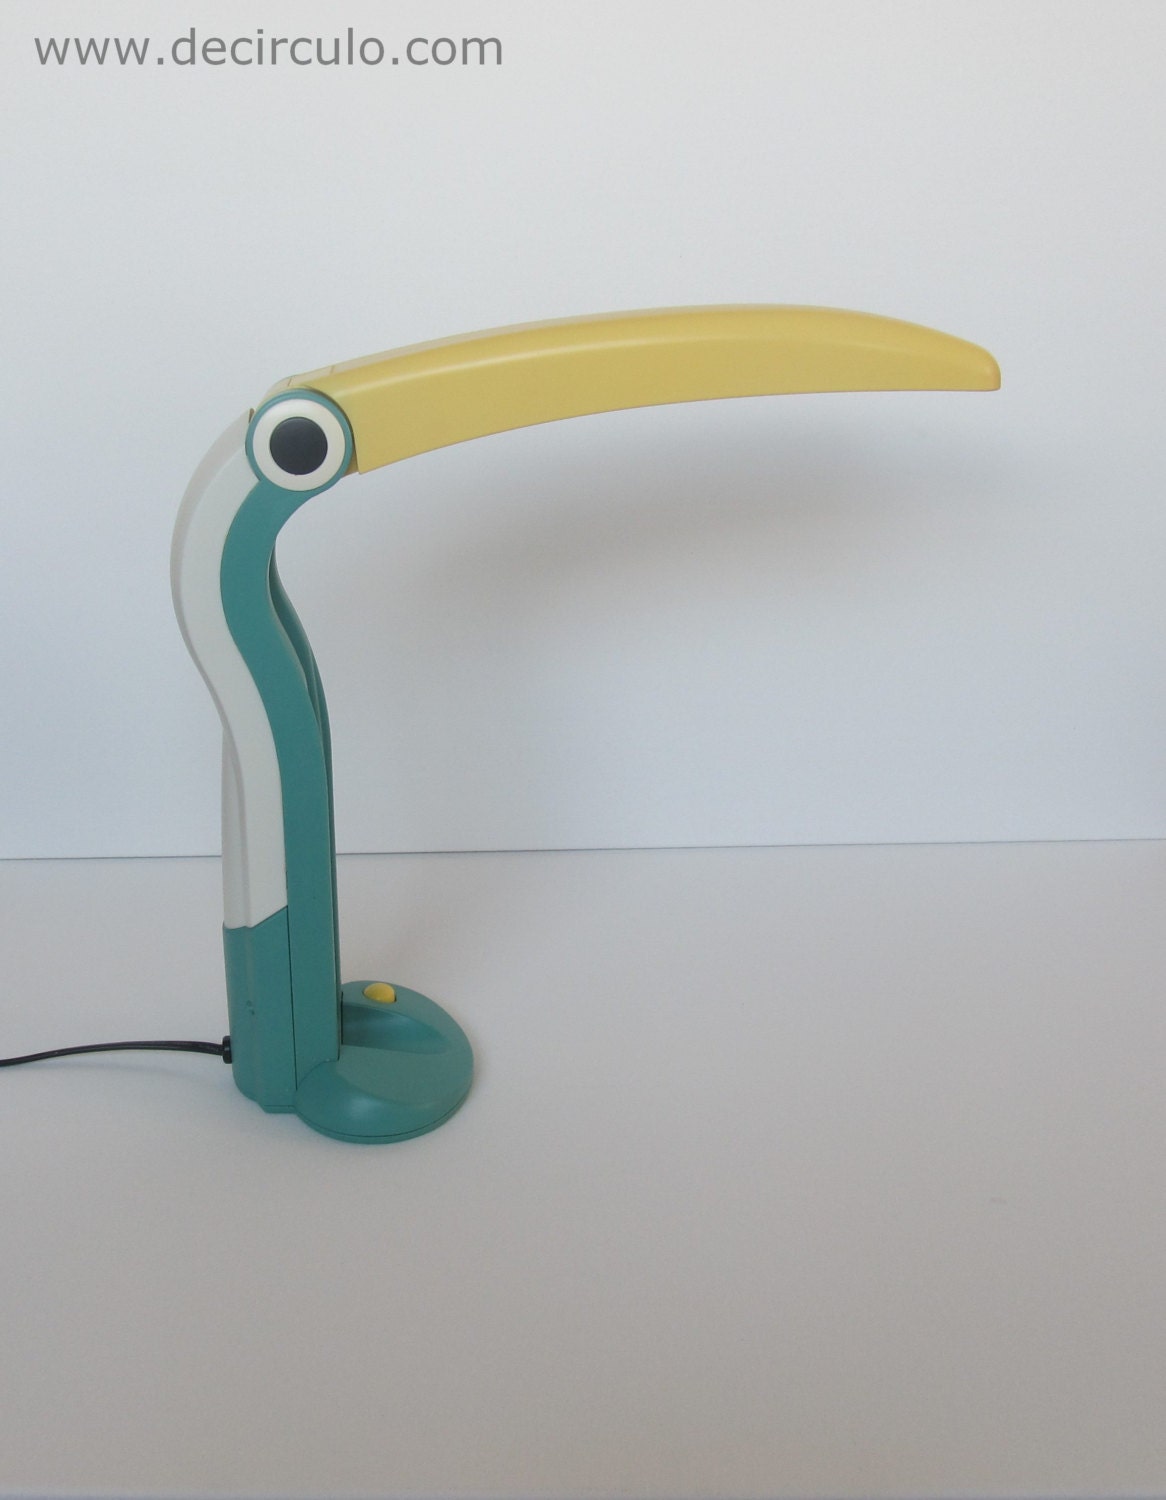 Retro toucan pelican desk table Lamp from huangslite, 1980's vintage great lighting for childrensroom bedroom or office workplace